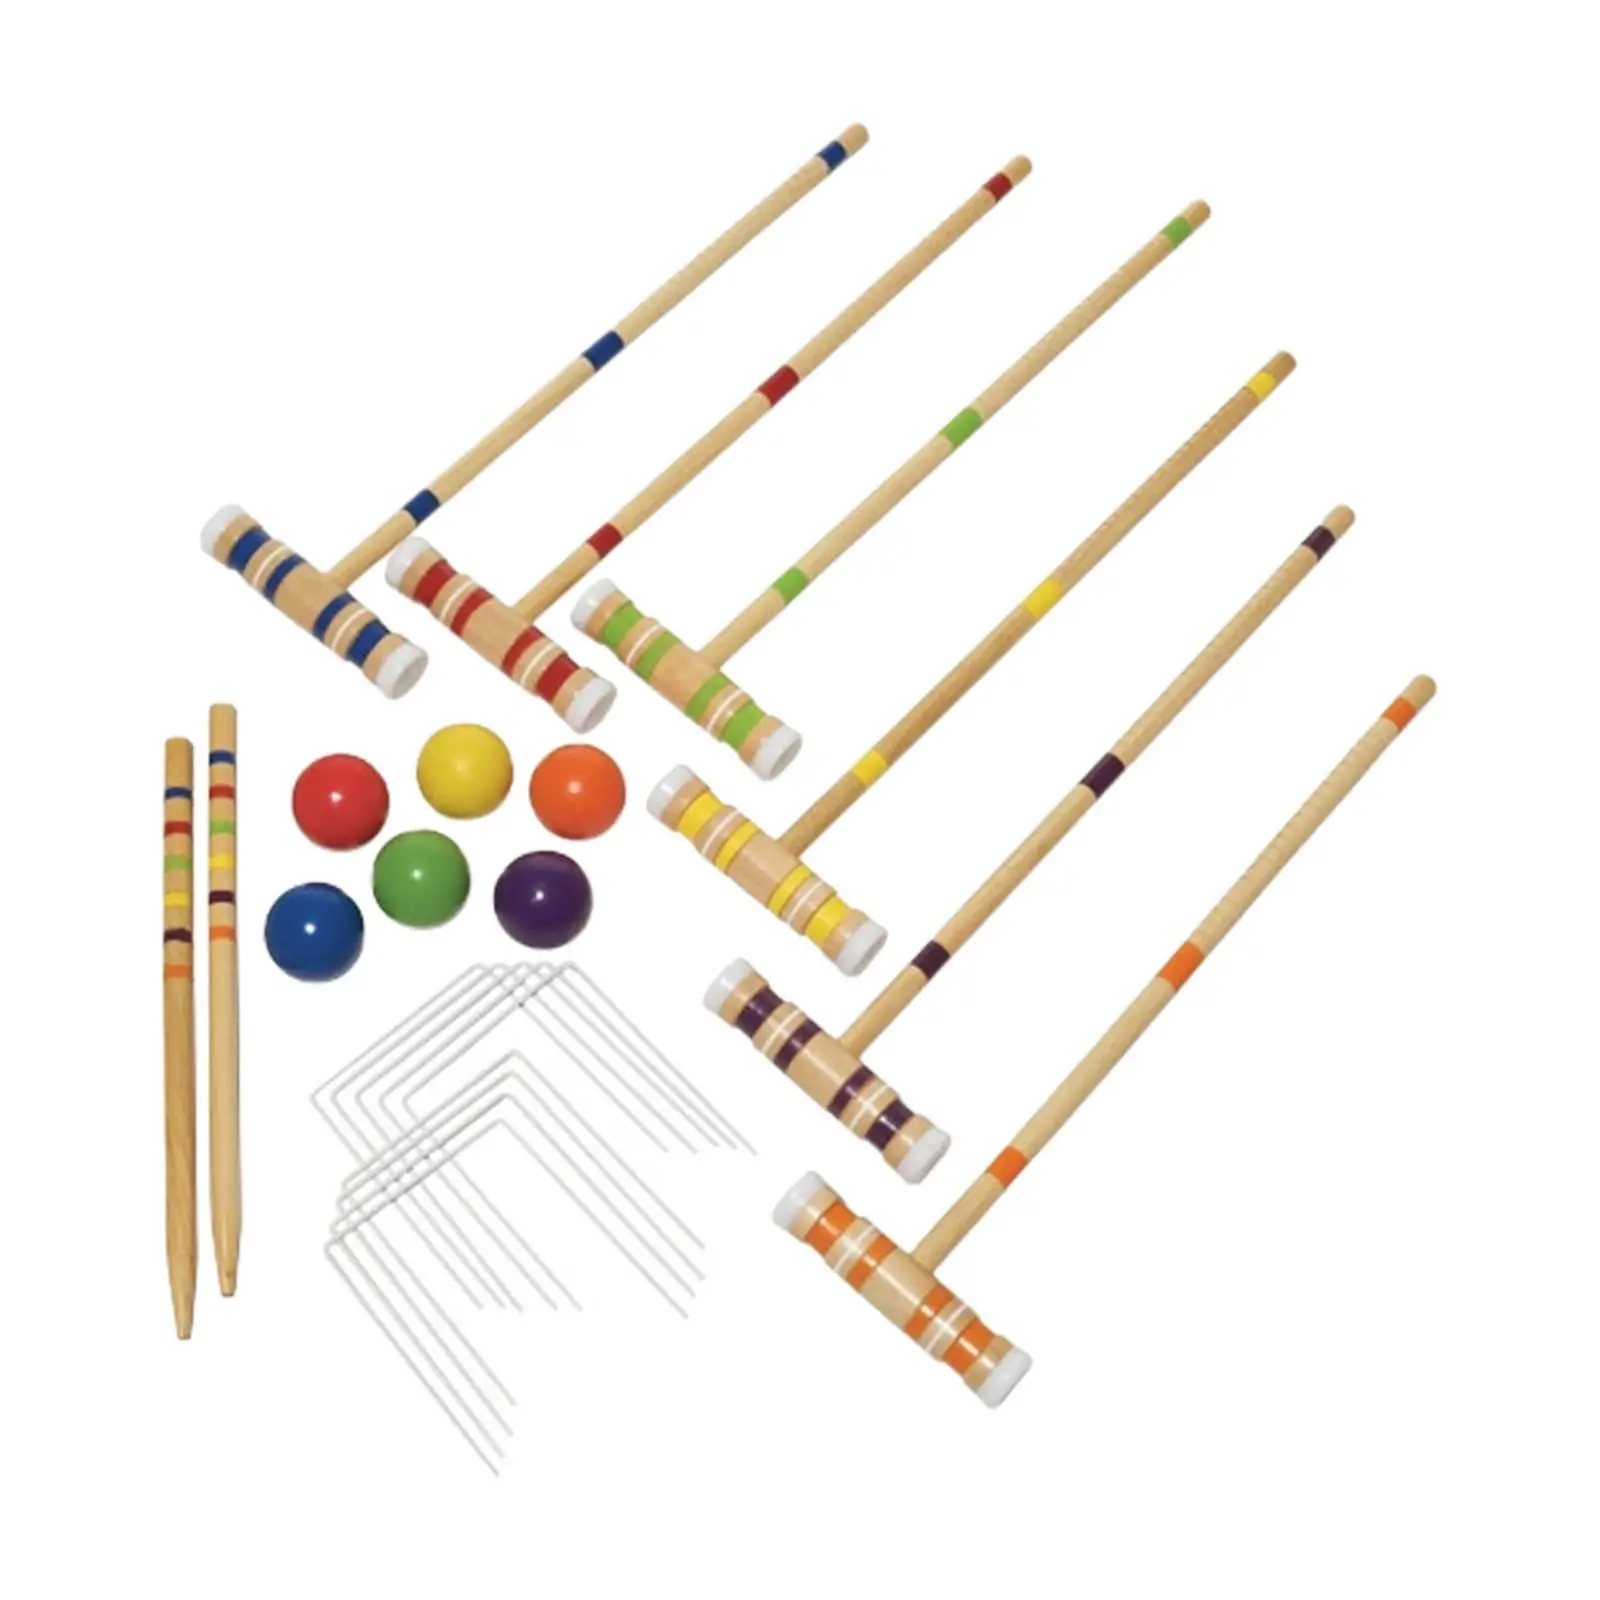 Lawn Croquet Game Set Croquet Set for 6 Players with Wooden Mallets Sport Outdoor Croquet Set for Parties Courtyard Family